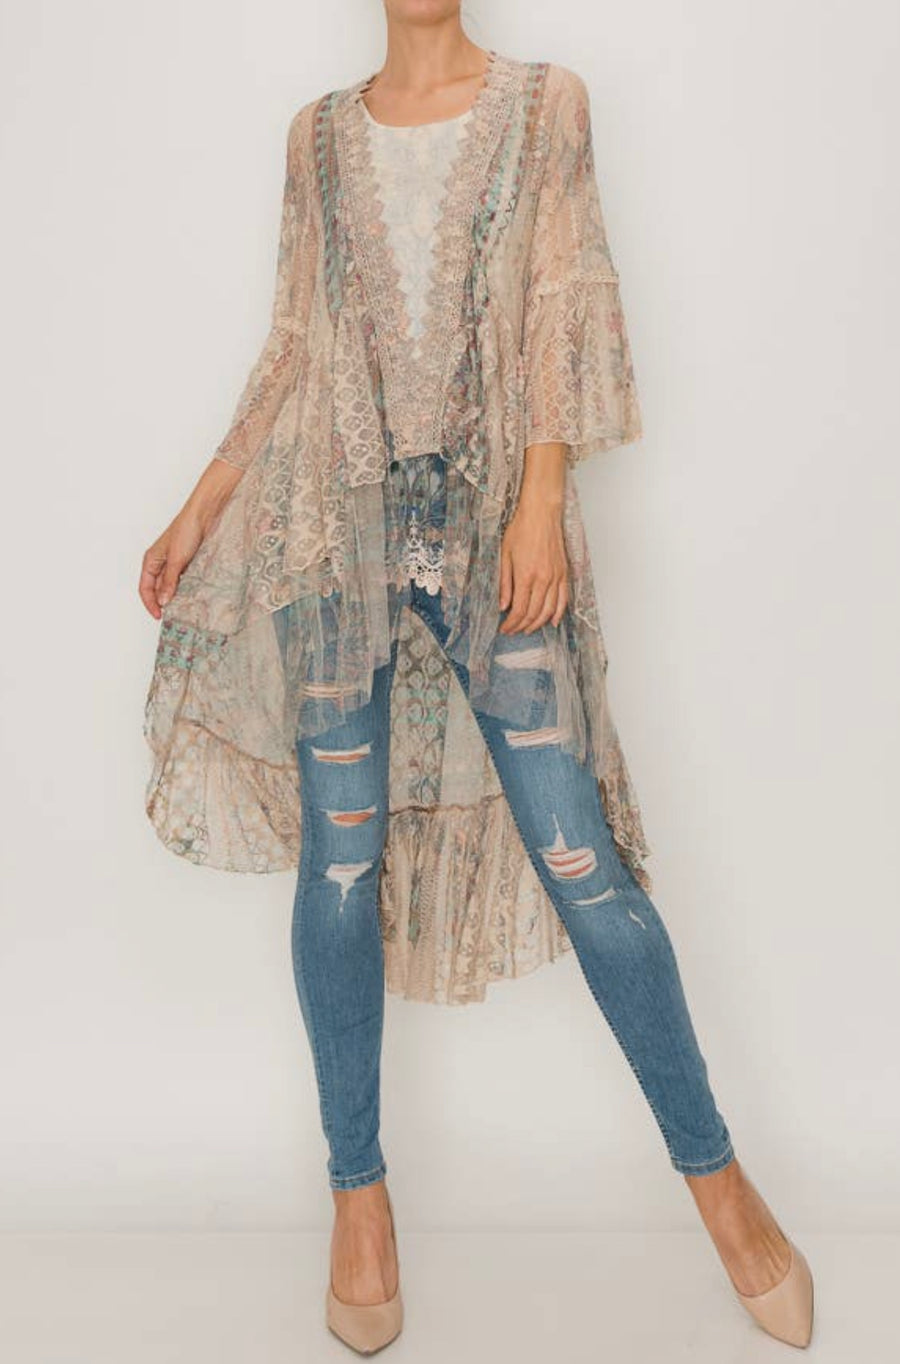 Printed Lace & Crochet Duster